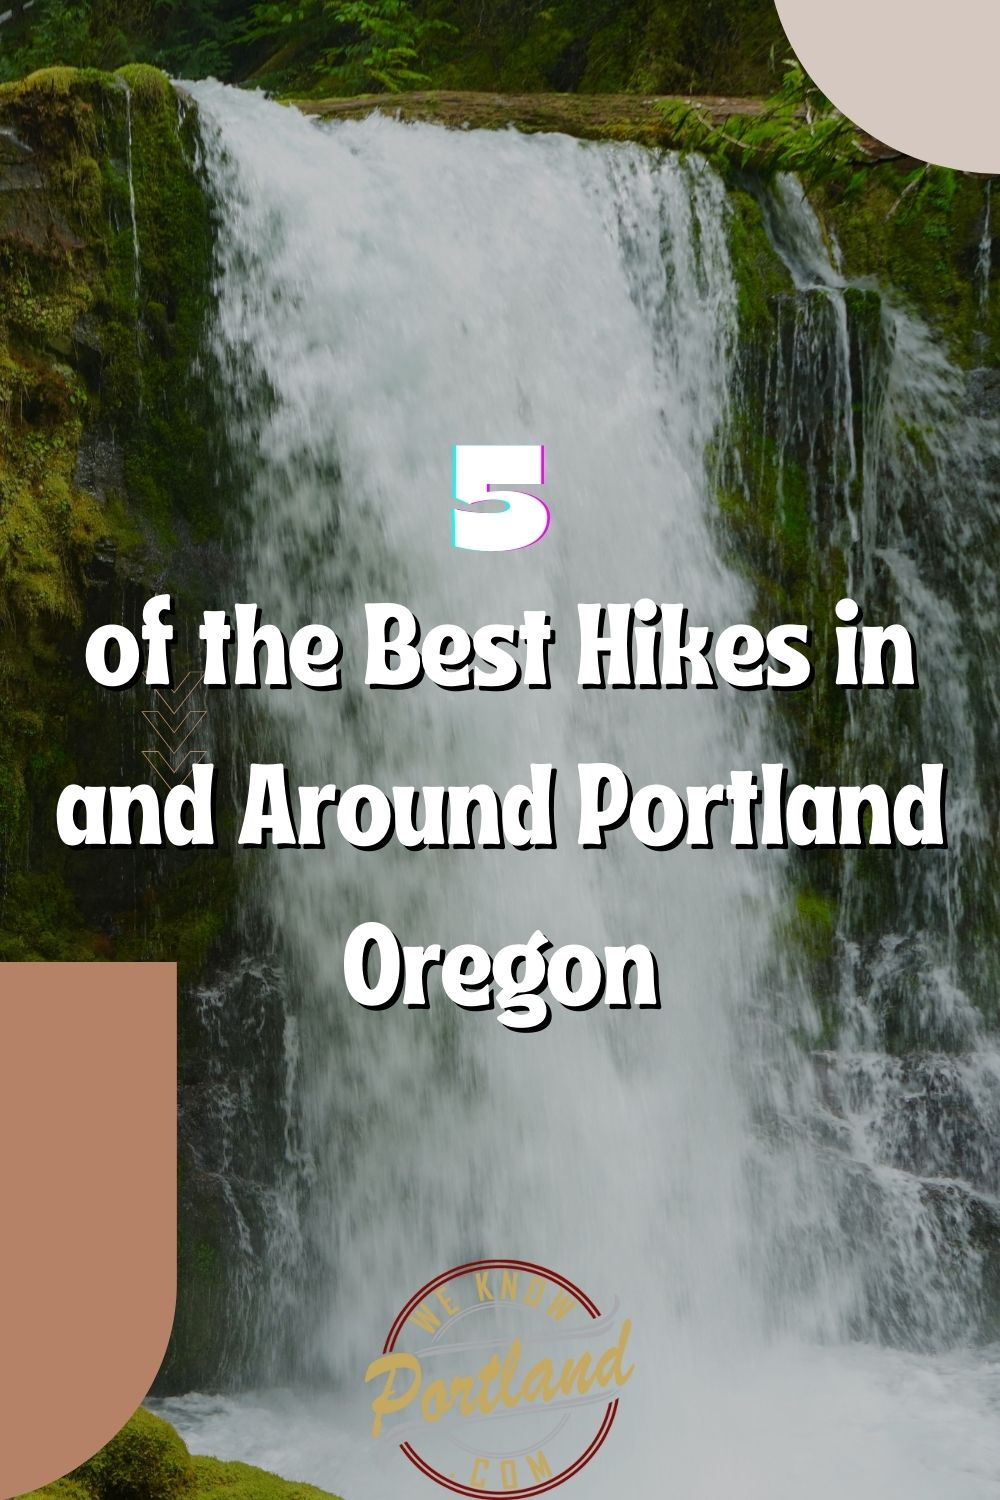 5 of the Best Hikes in and Around Portland Oregon